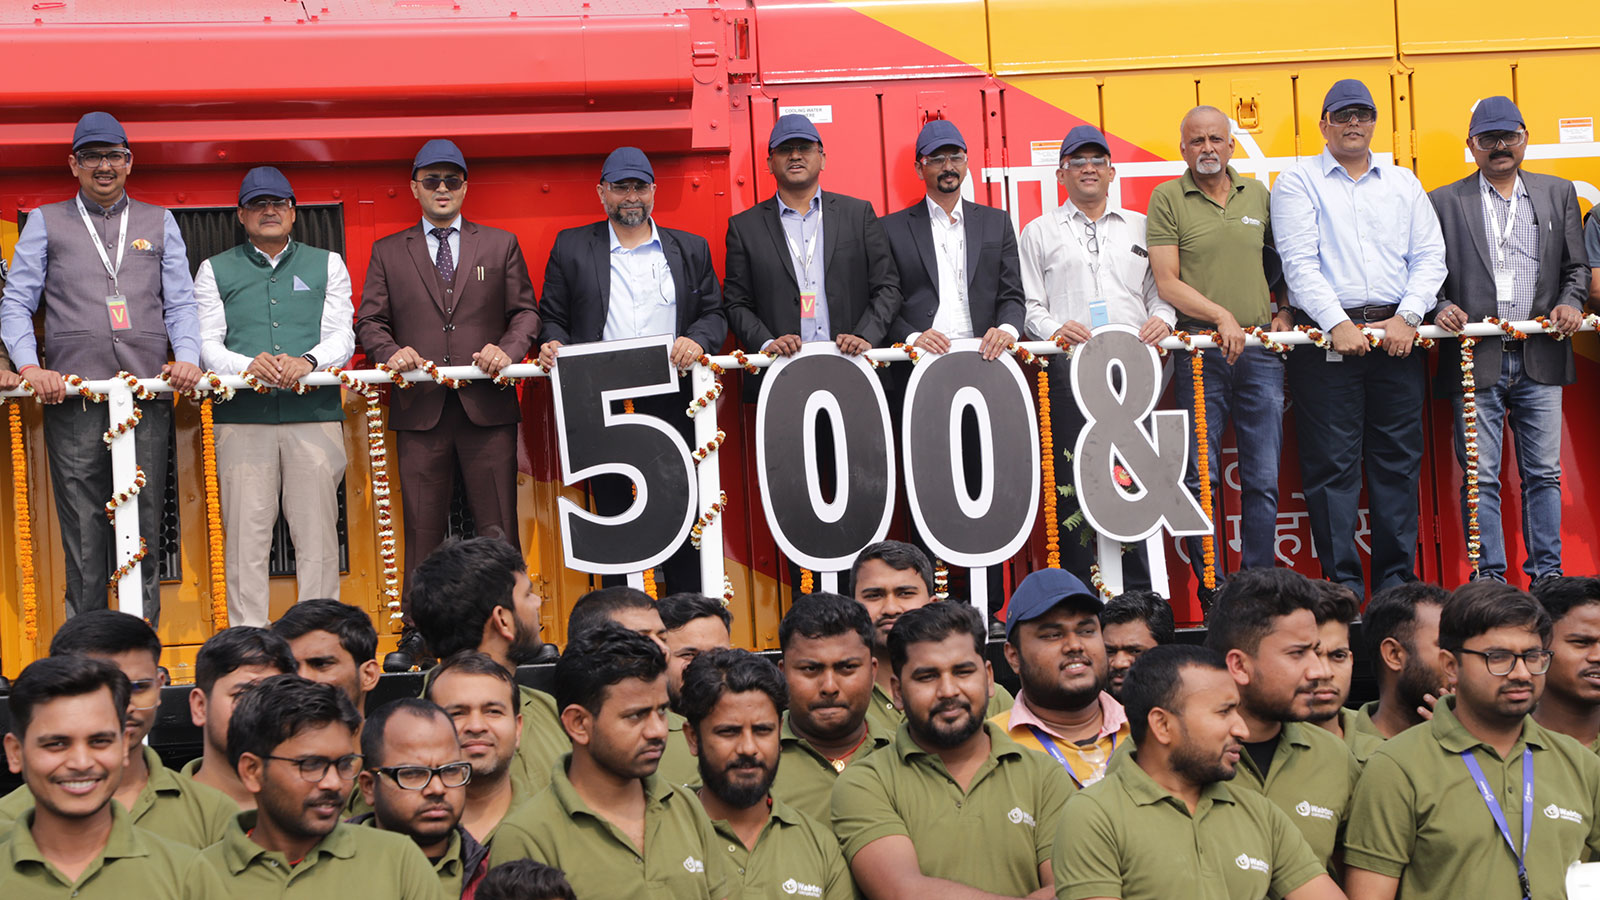 Wabtec Delivers the 500th Evolution Series Locomotive to Indian Railways